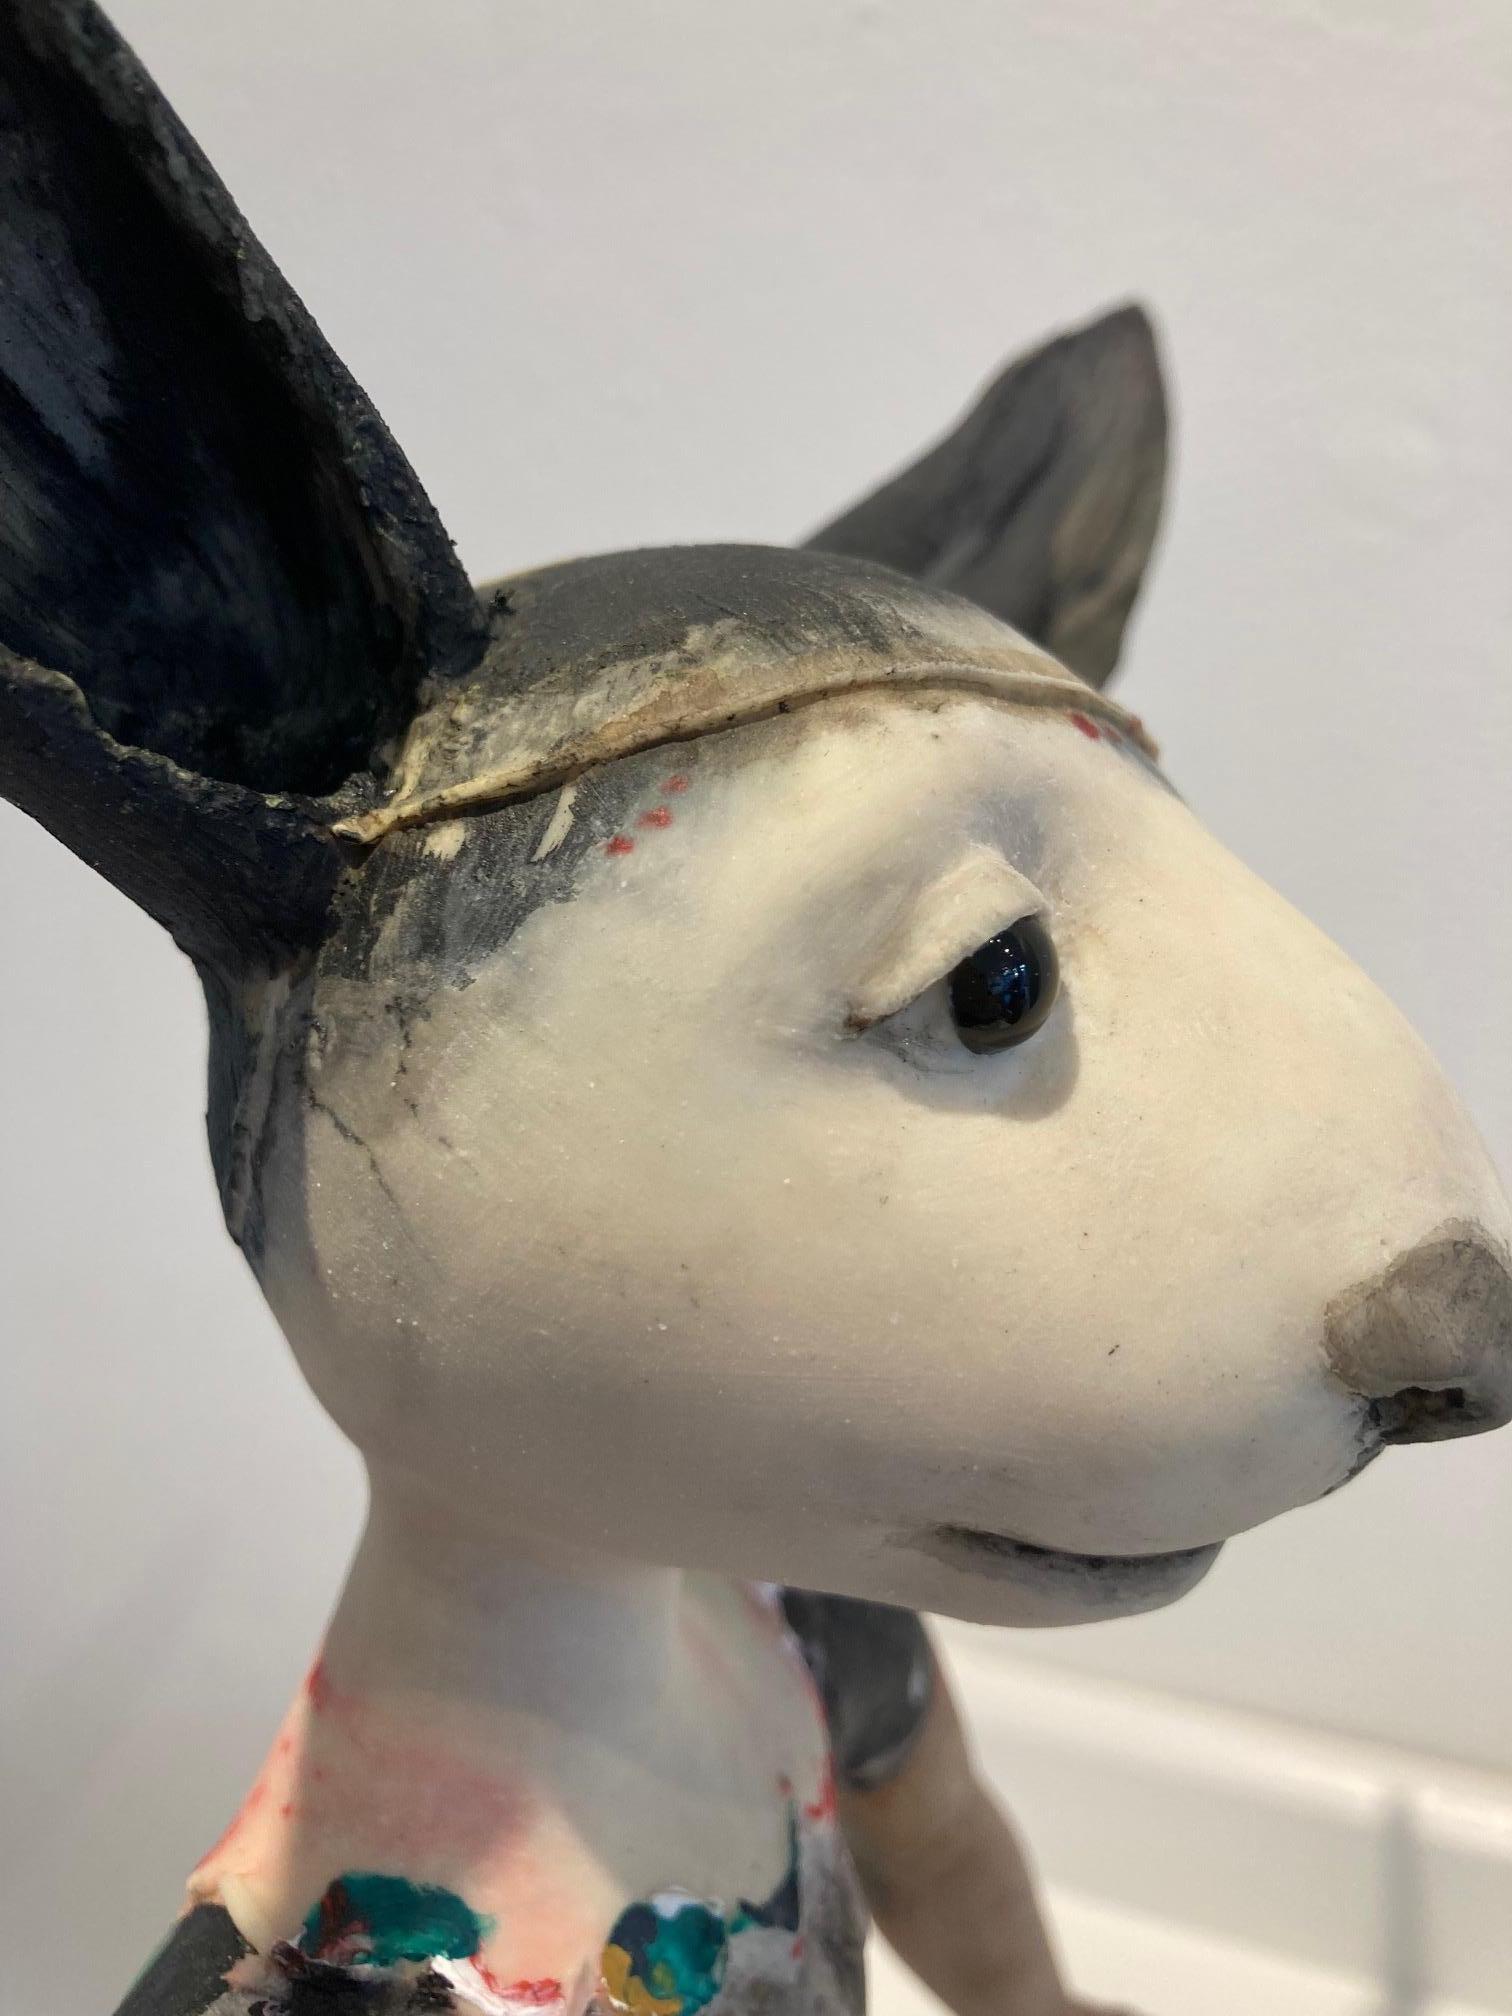 X Mixed Media Sculpture Animal Ears Shadow Fantasy Contemporary Art In Stock - Sizes are including pedestal 
Corjan Nodelijk is a composer and a professional storyteller. The quirky and surreal creatures - mostly people or animals - seem curious.